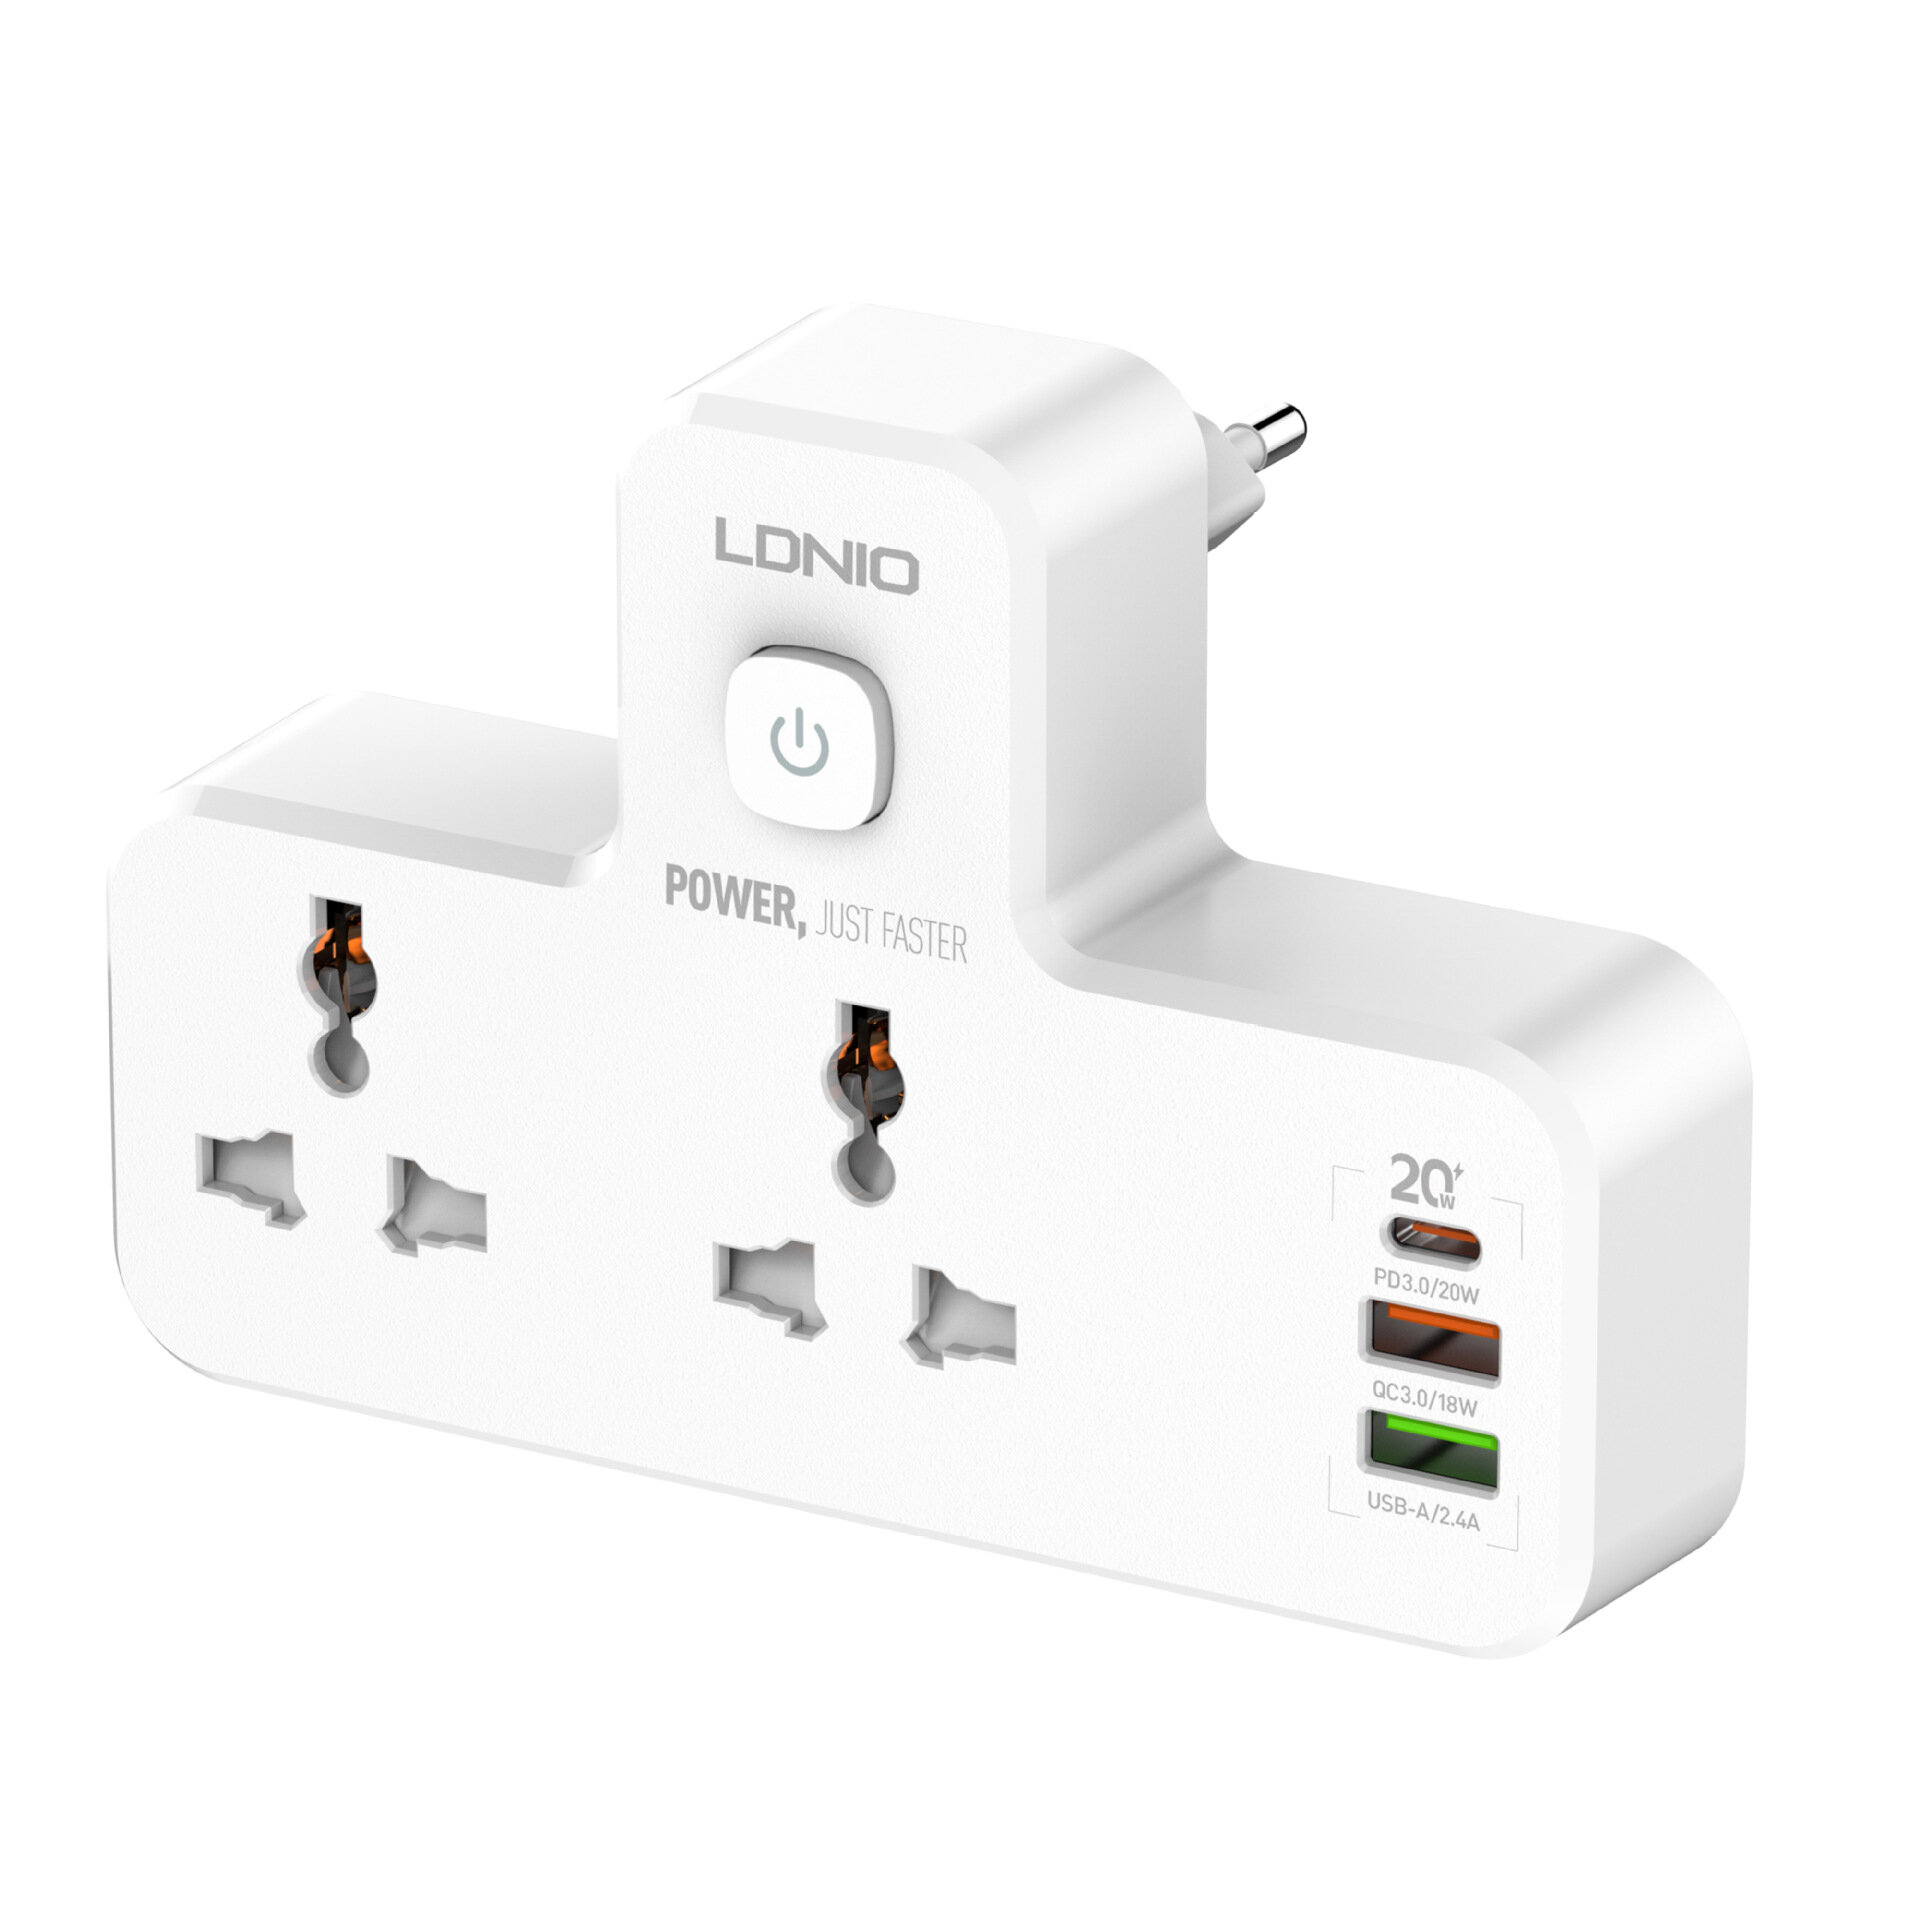 

LDNIO SC2311 Power Socket Universal 2 Outlets 20W PD QC3.0 3USB Wall Charger Power Strip Adapter Multiple Plug Expander